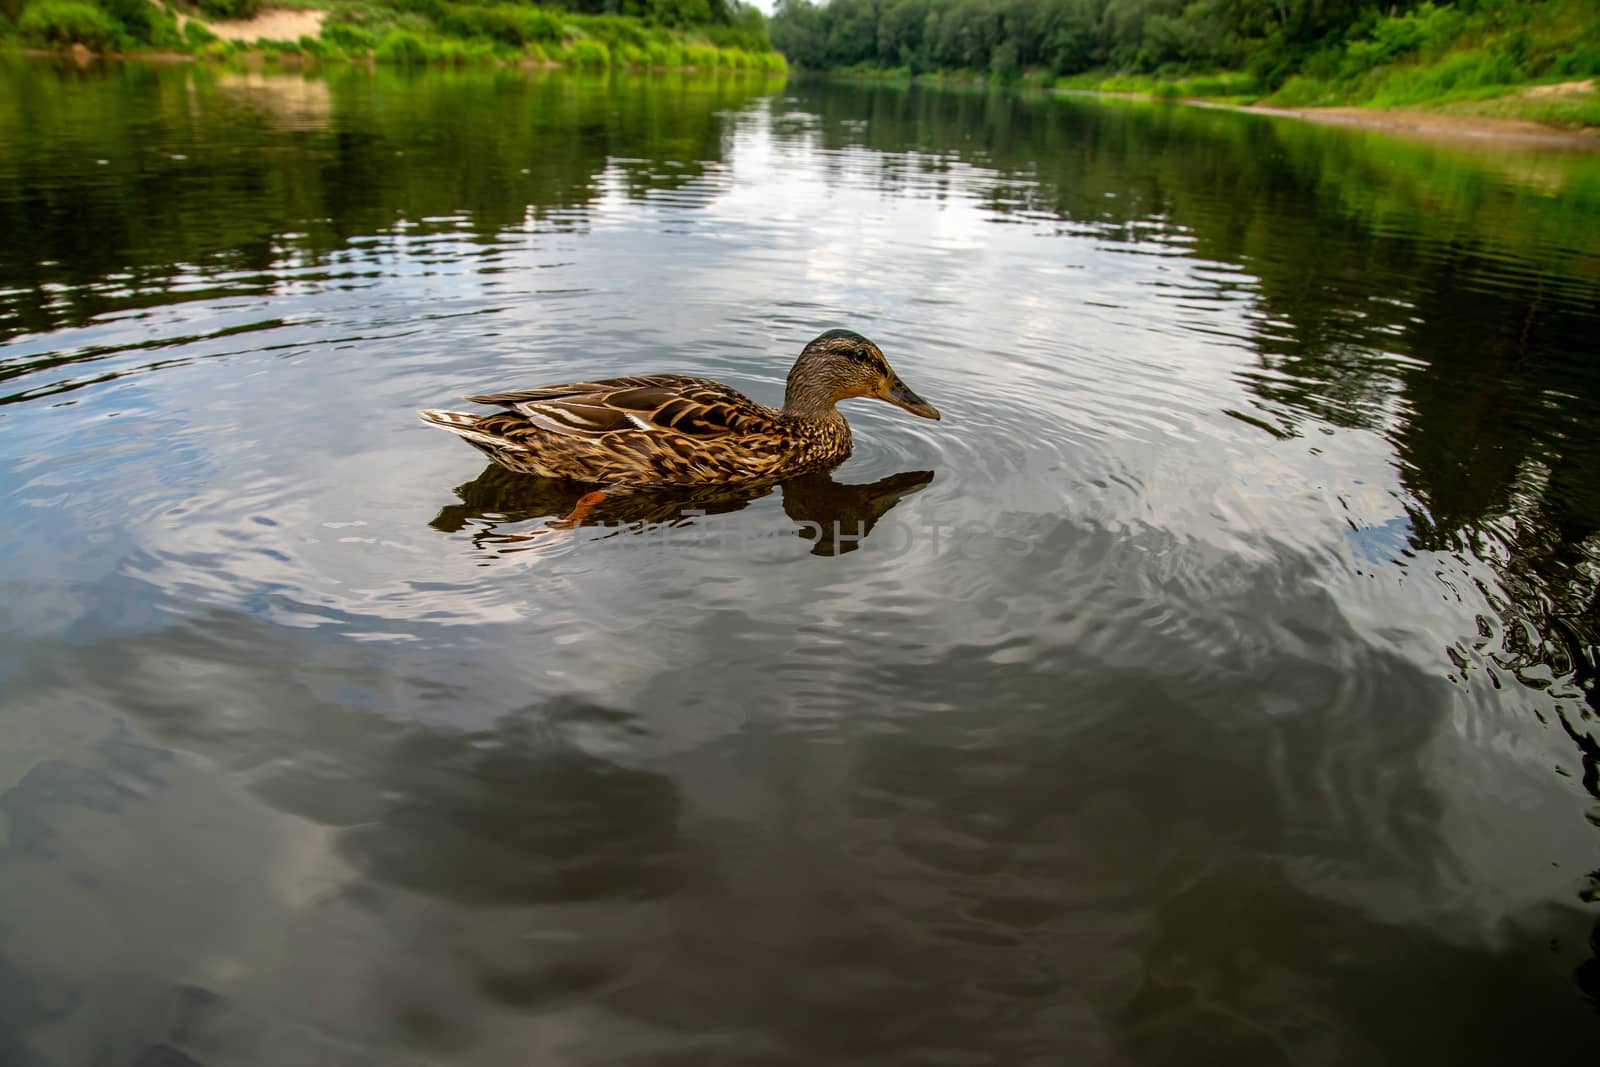 Duck swimming in the river Gauja. Duck on coast of river Gauja in Latvia. Duck is a waterbird with a broad blunt bill, short legs, webbed feet, and a waddling gait.